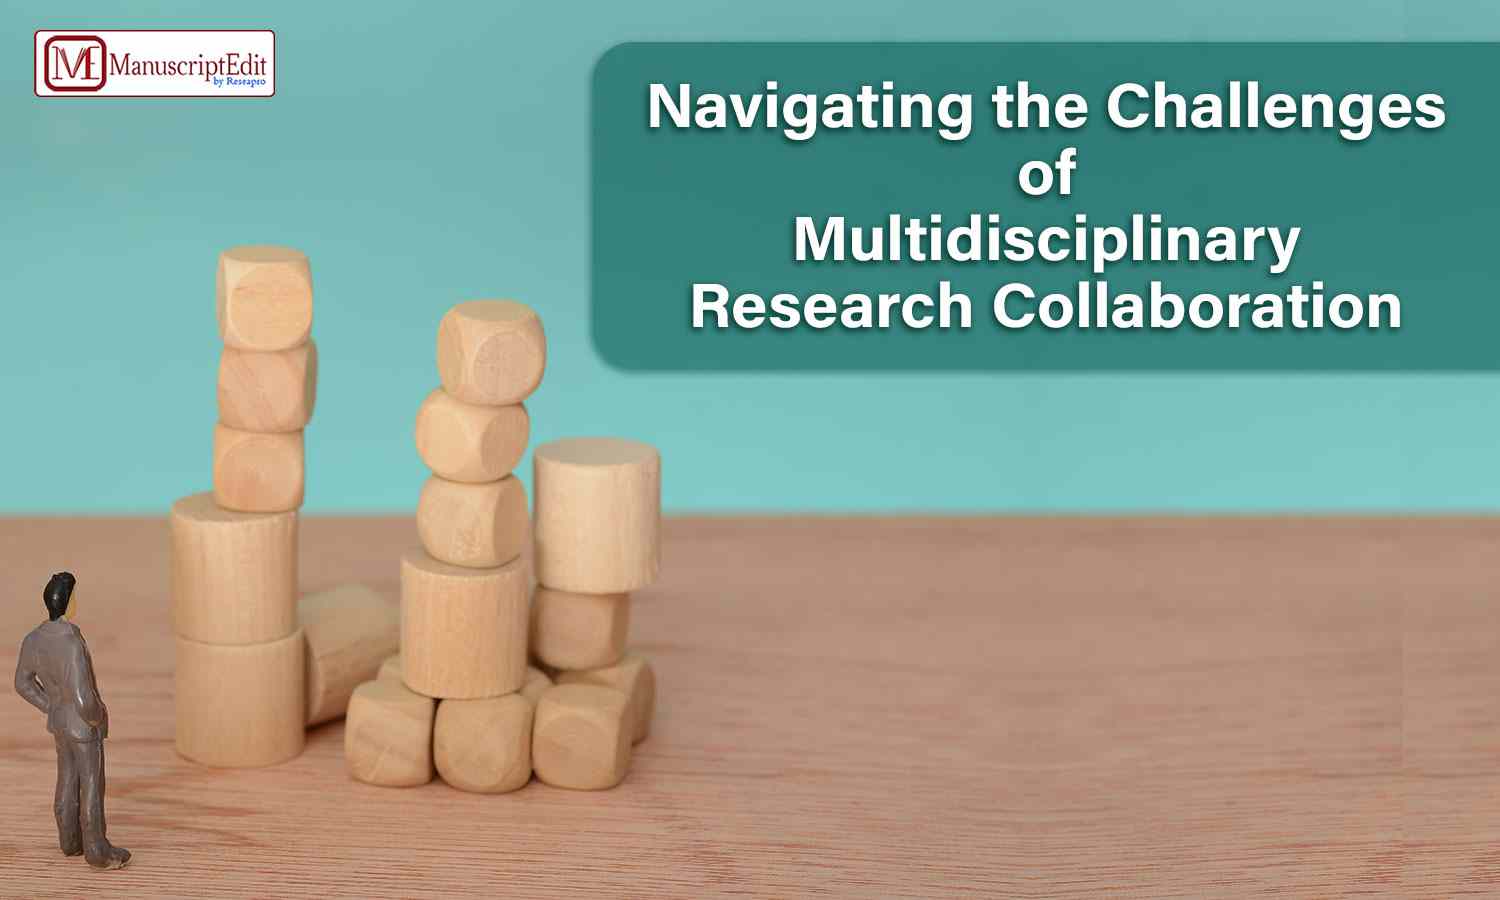 Navigating the Challenges of Multidisciplinary Research Collaboration